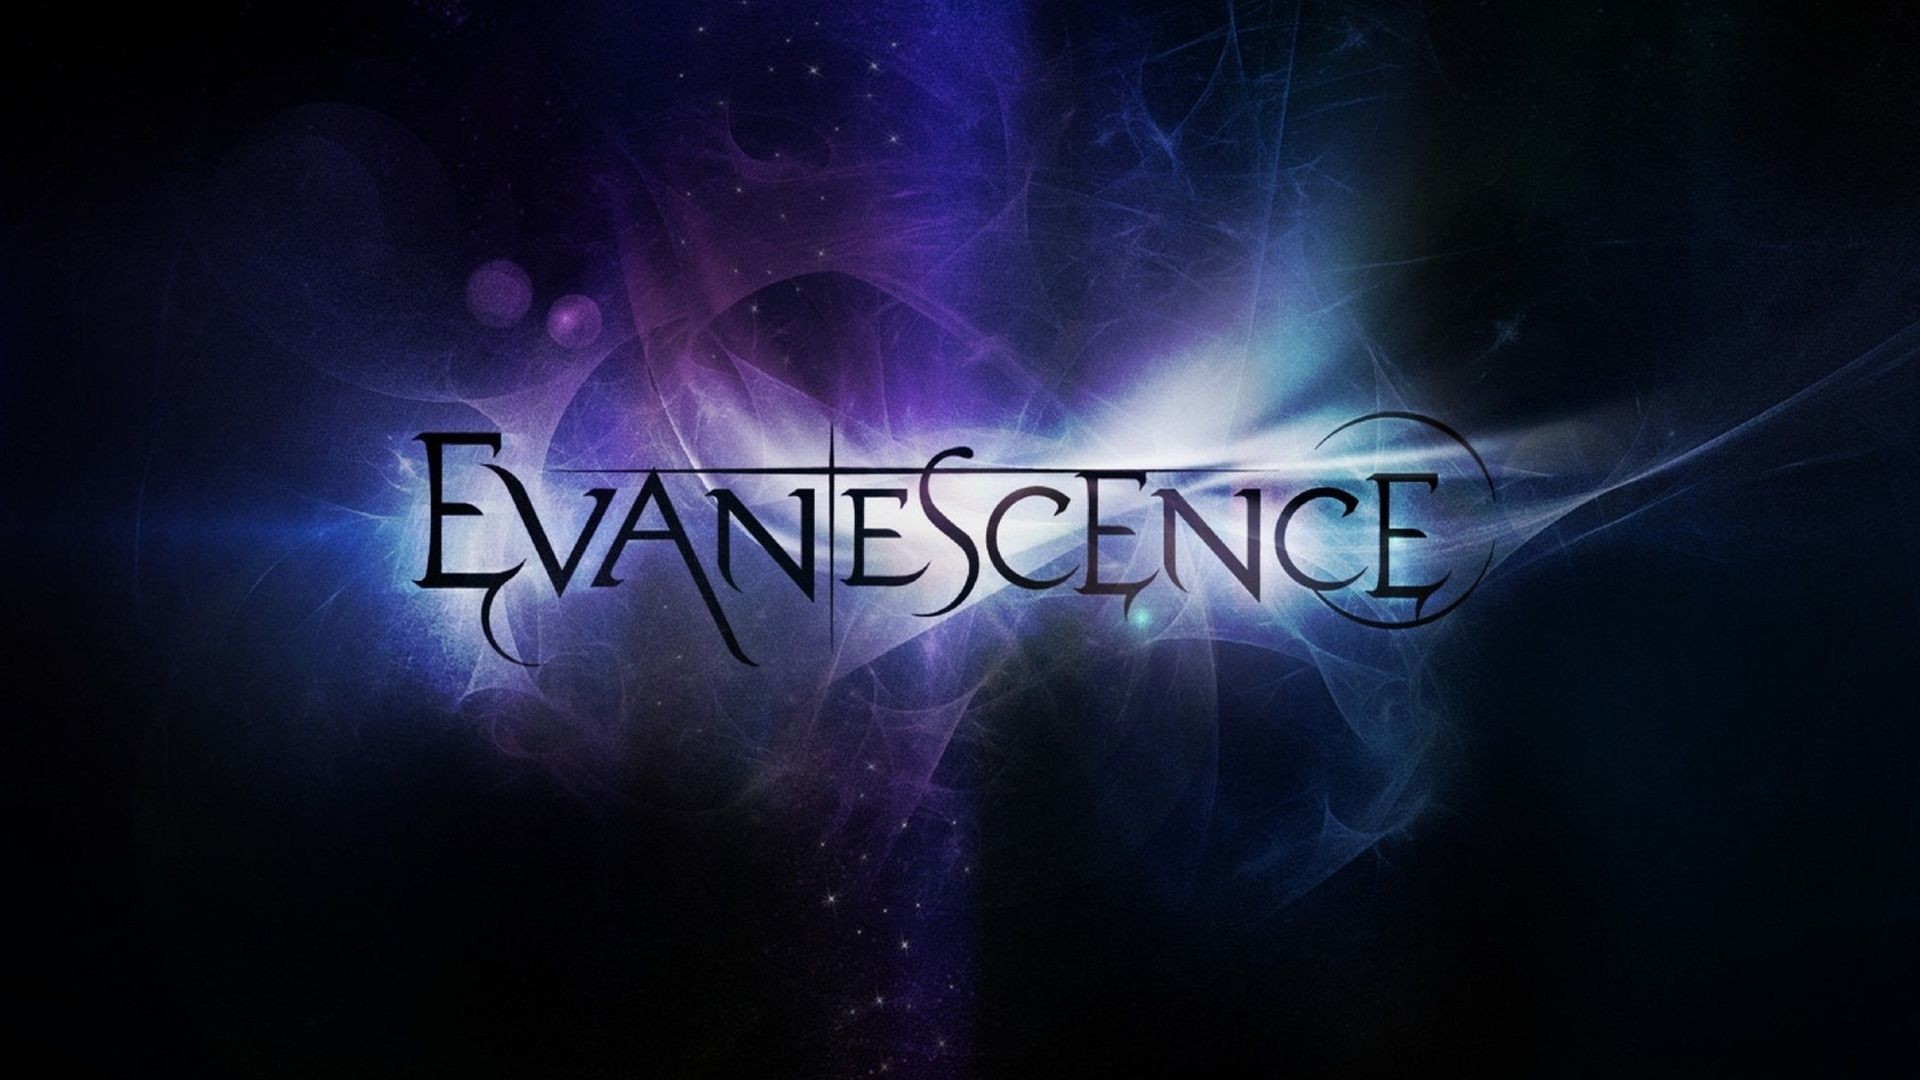 1920x1080 Evanescence Logo | Evanescence Logo HD Wallpaper. This is absolutely one of  my faves!